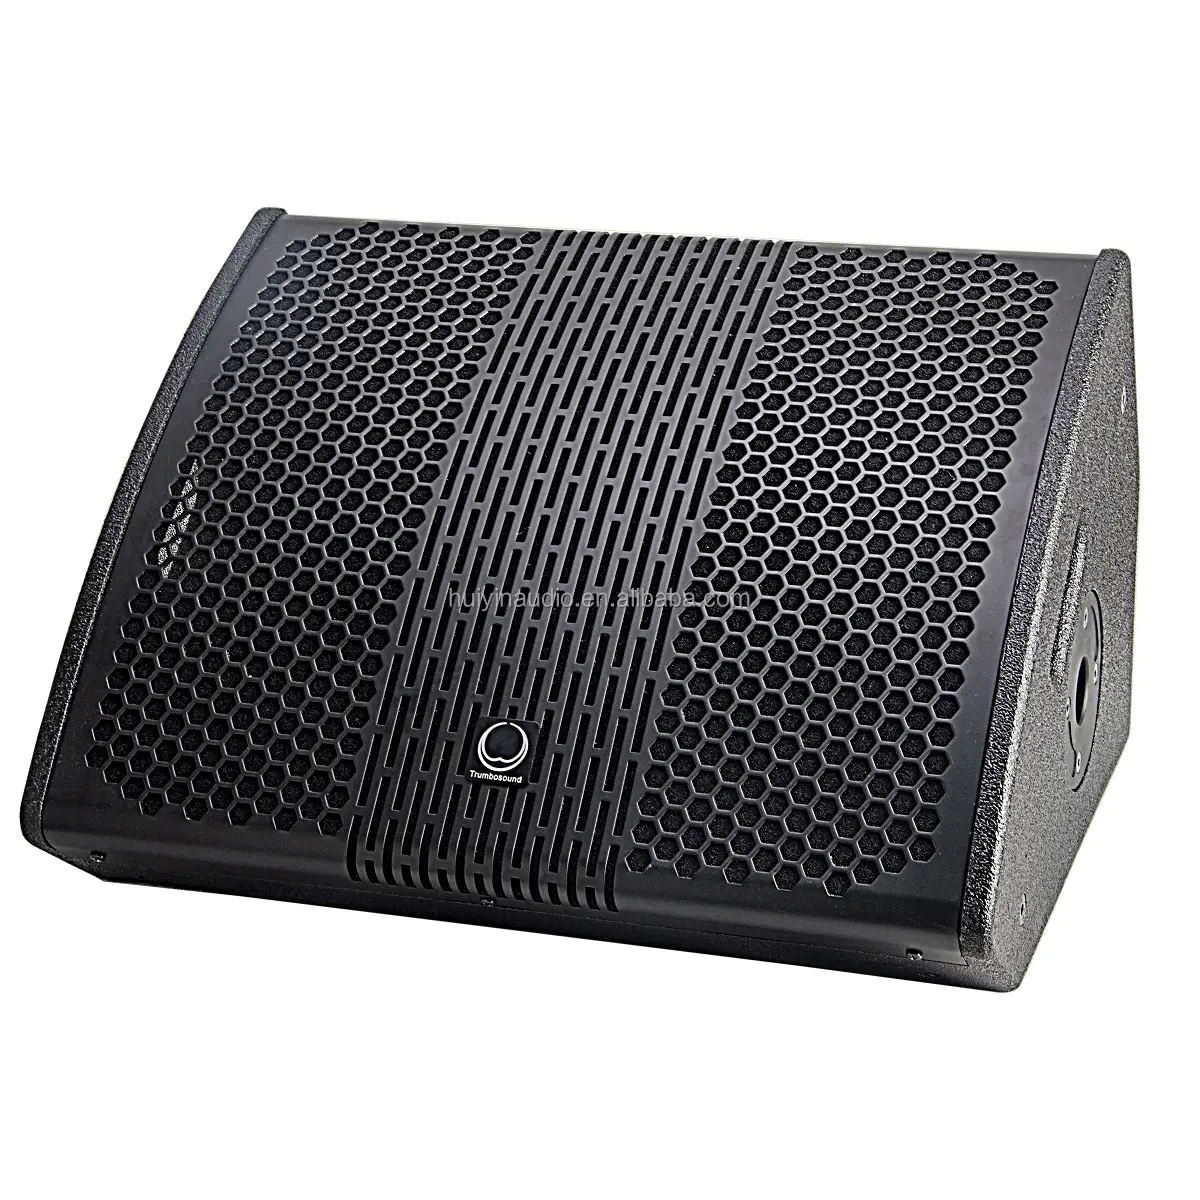 LA12M Pro audio 12 inch monitors 400w rms 1.5 inch tweeter full range coaxial speaker compact two-way stage monitor